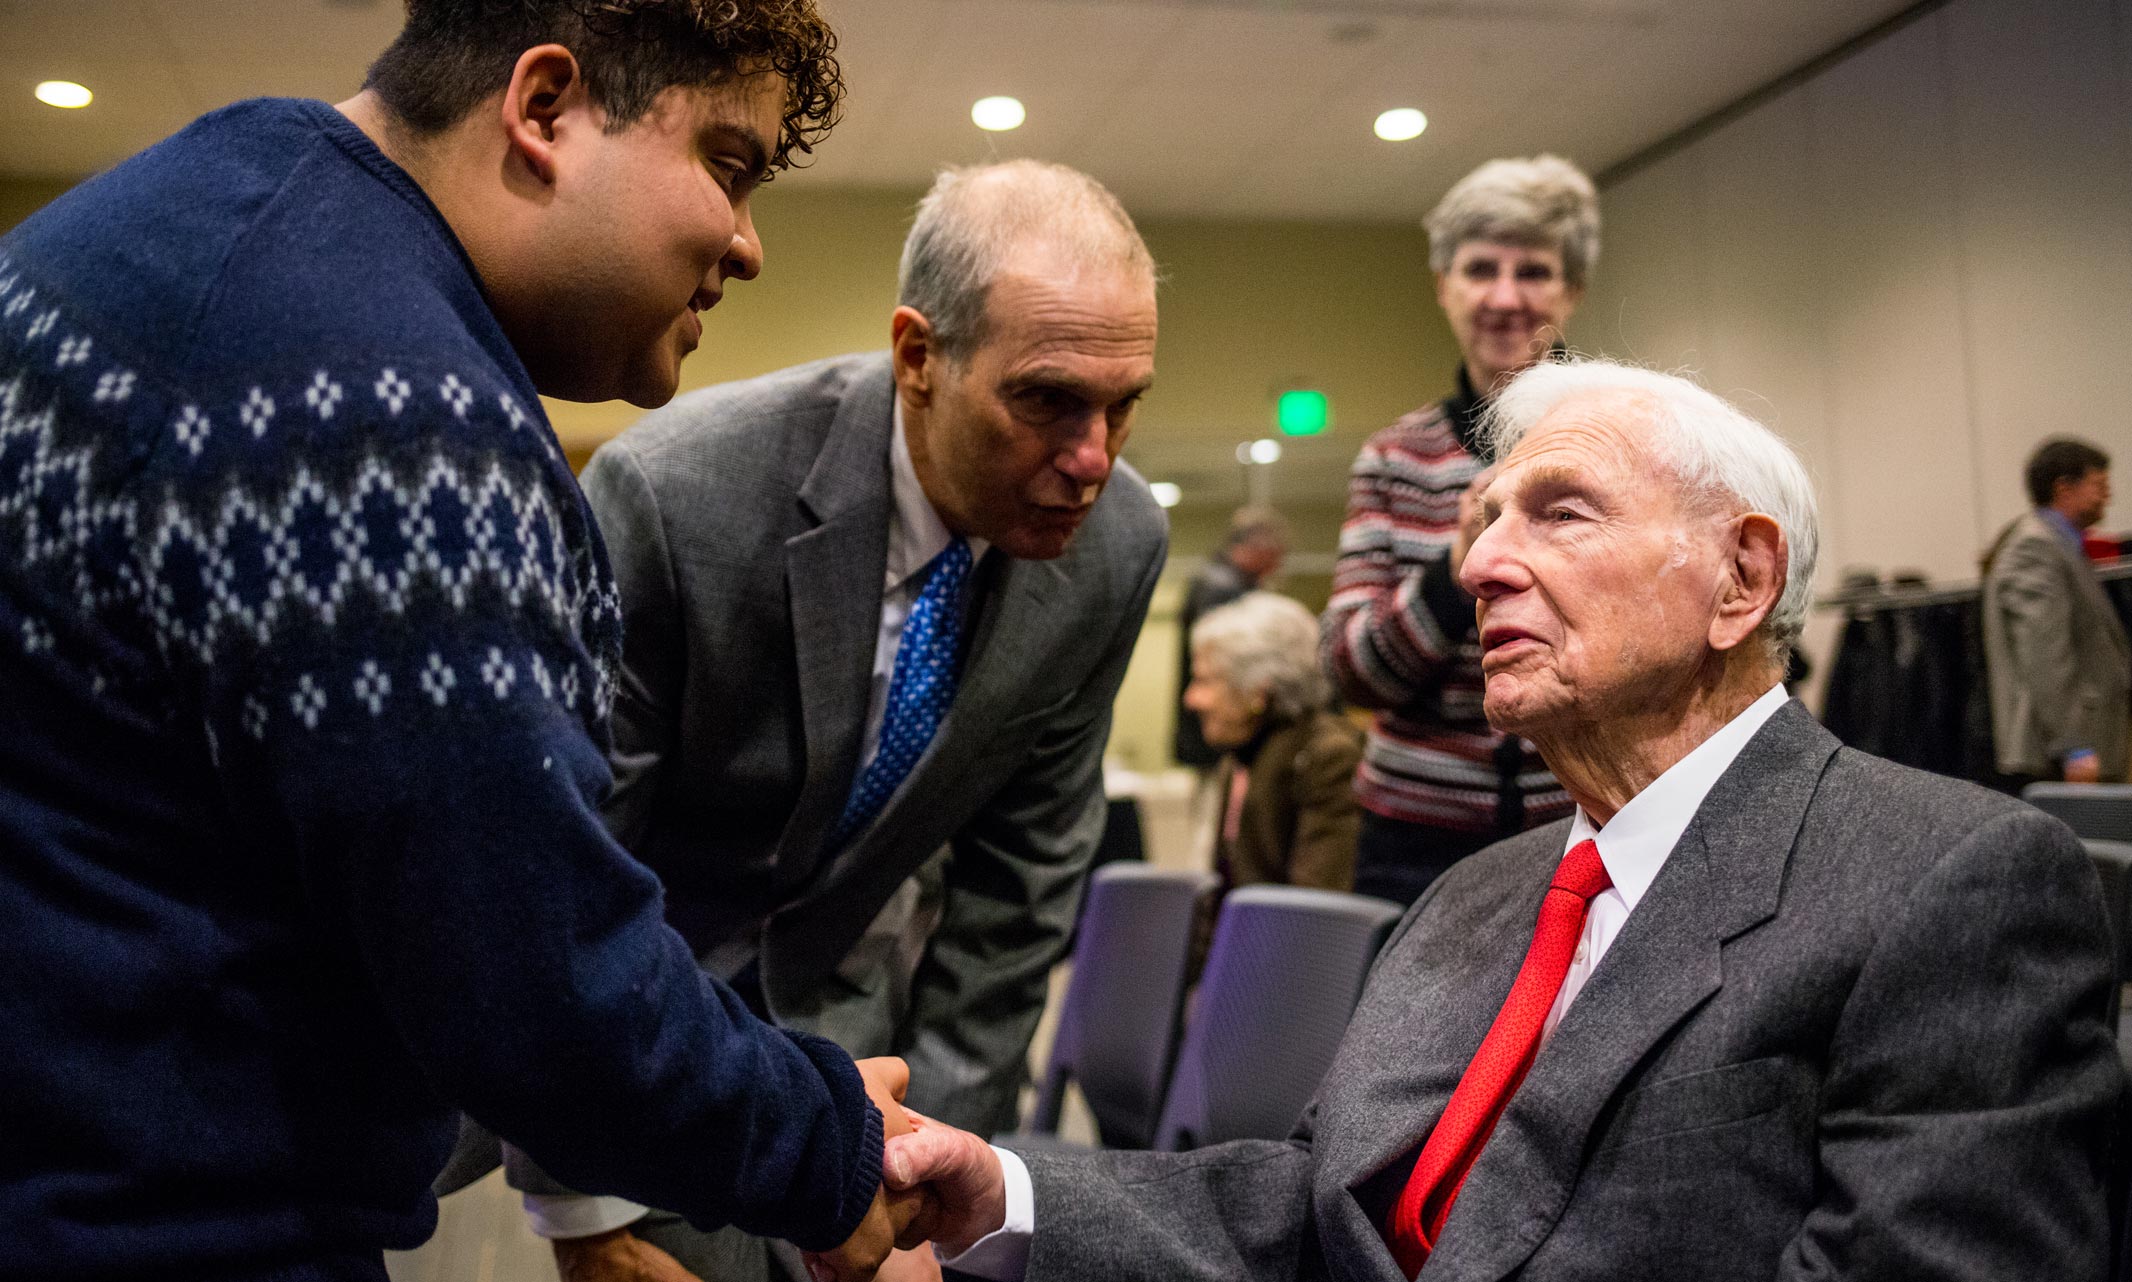 UMKC student Brian Ramirez greets Henry Bloch at the scholarship announcement event